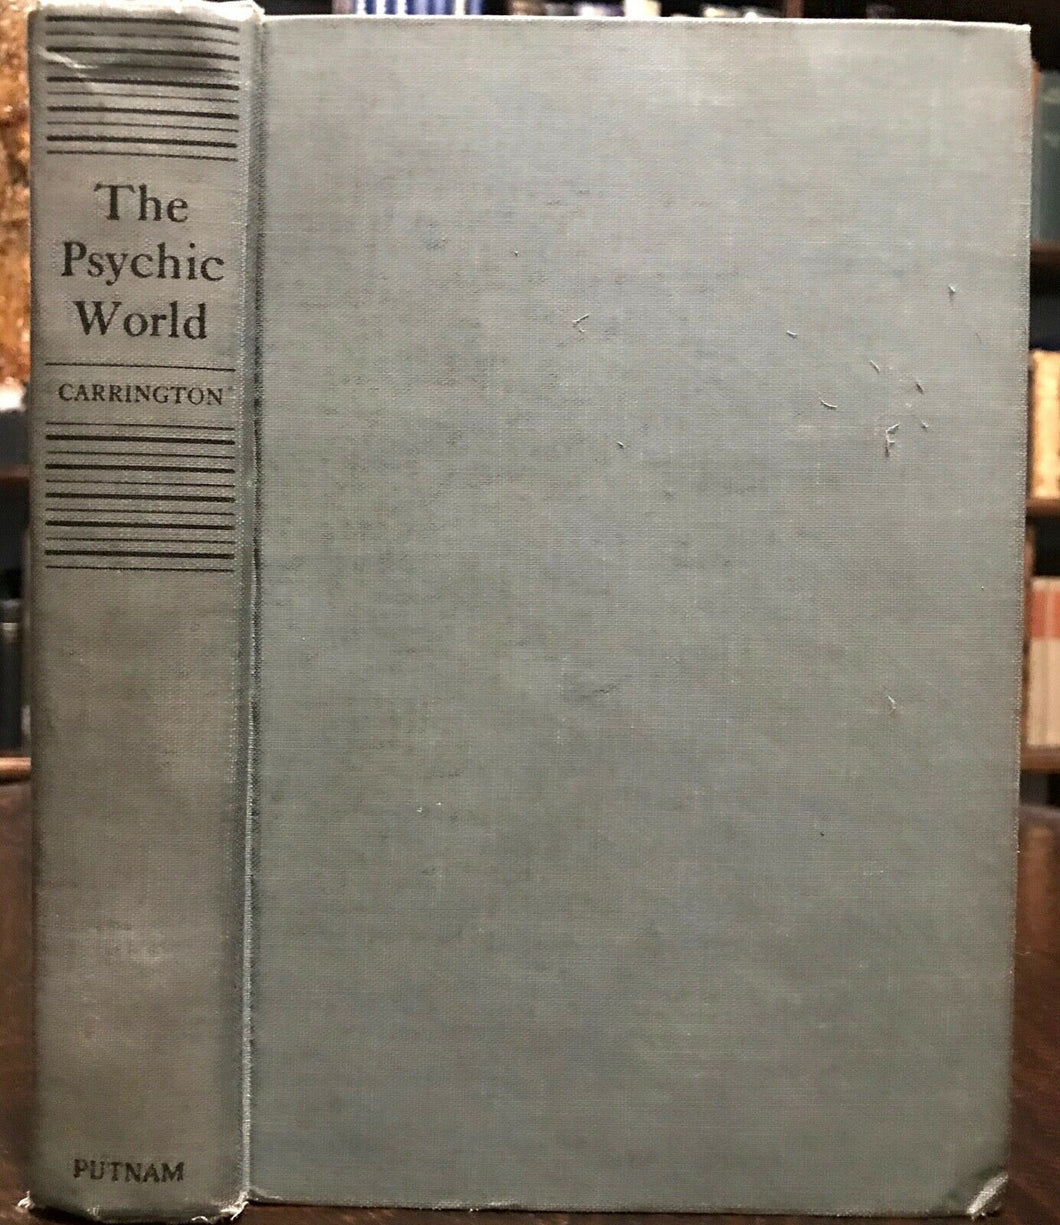 THE PSYCHIC WORLD - Carrington, 1st 1937 - SPIRITS GHOSTS SPIRITUALISM AFTERLIFE